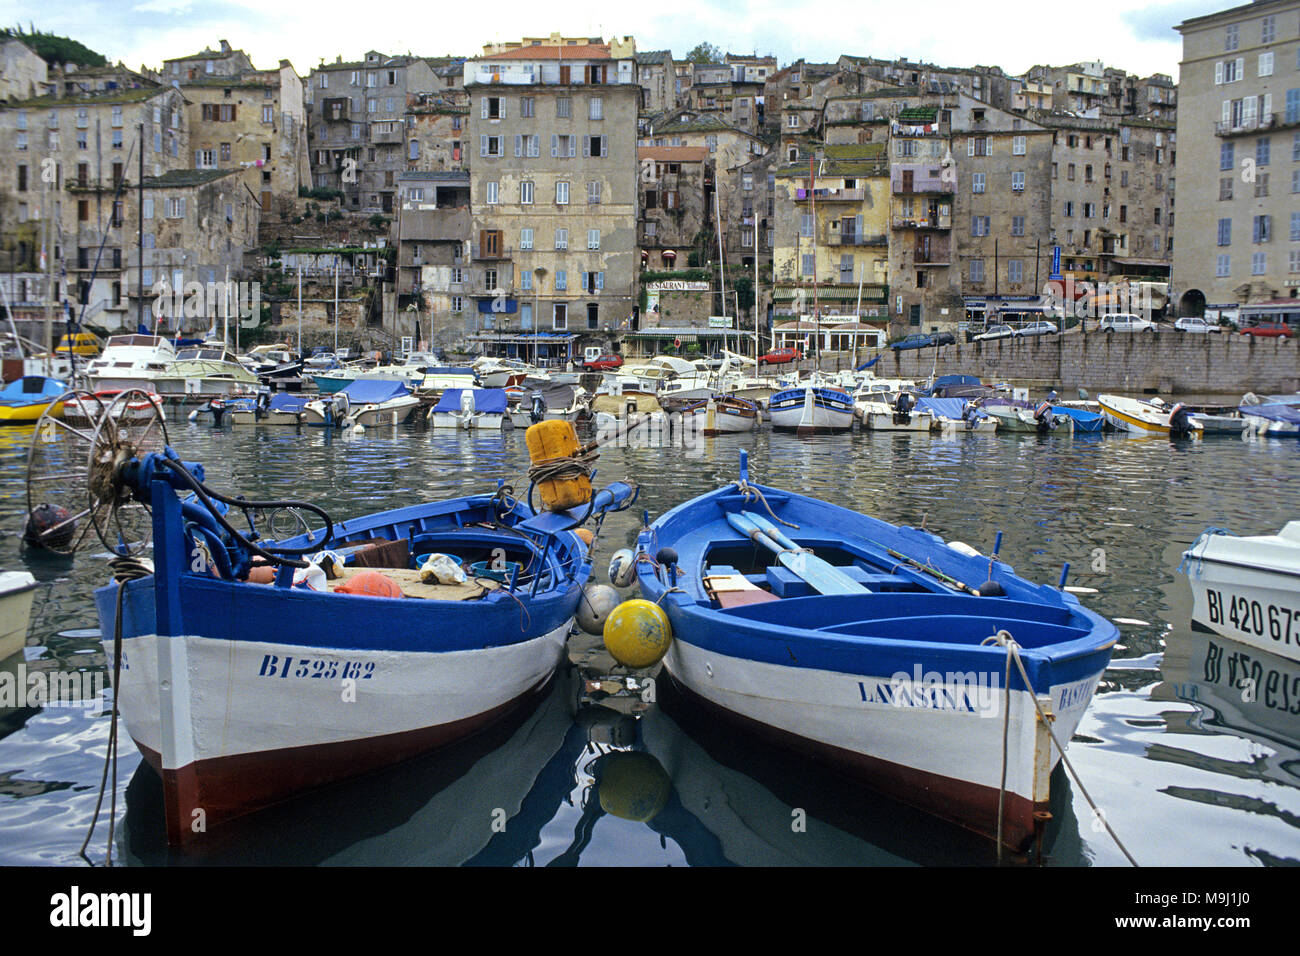 Historic old town and harbour of Bastia, Corsica, France, Mediterranean, Europe Stock Photo